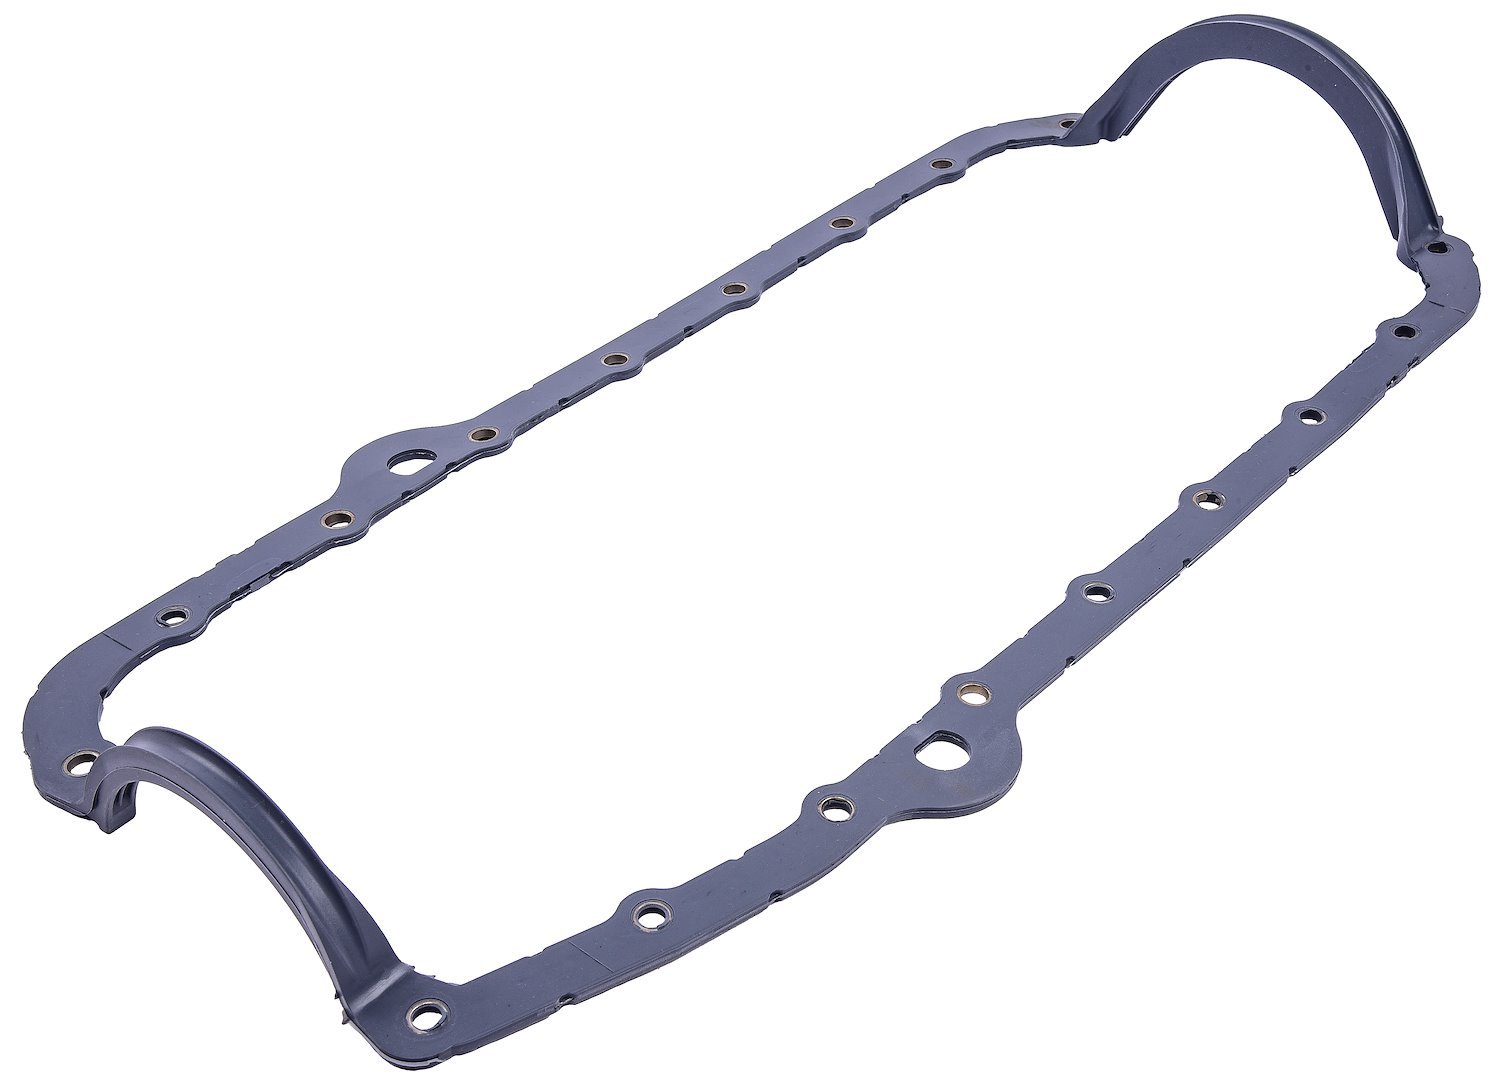 Oil Pan Gasket for 1975-1979 Small Block Chevy